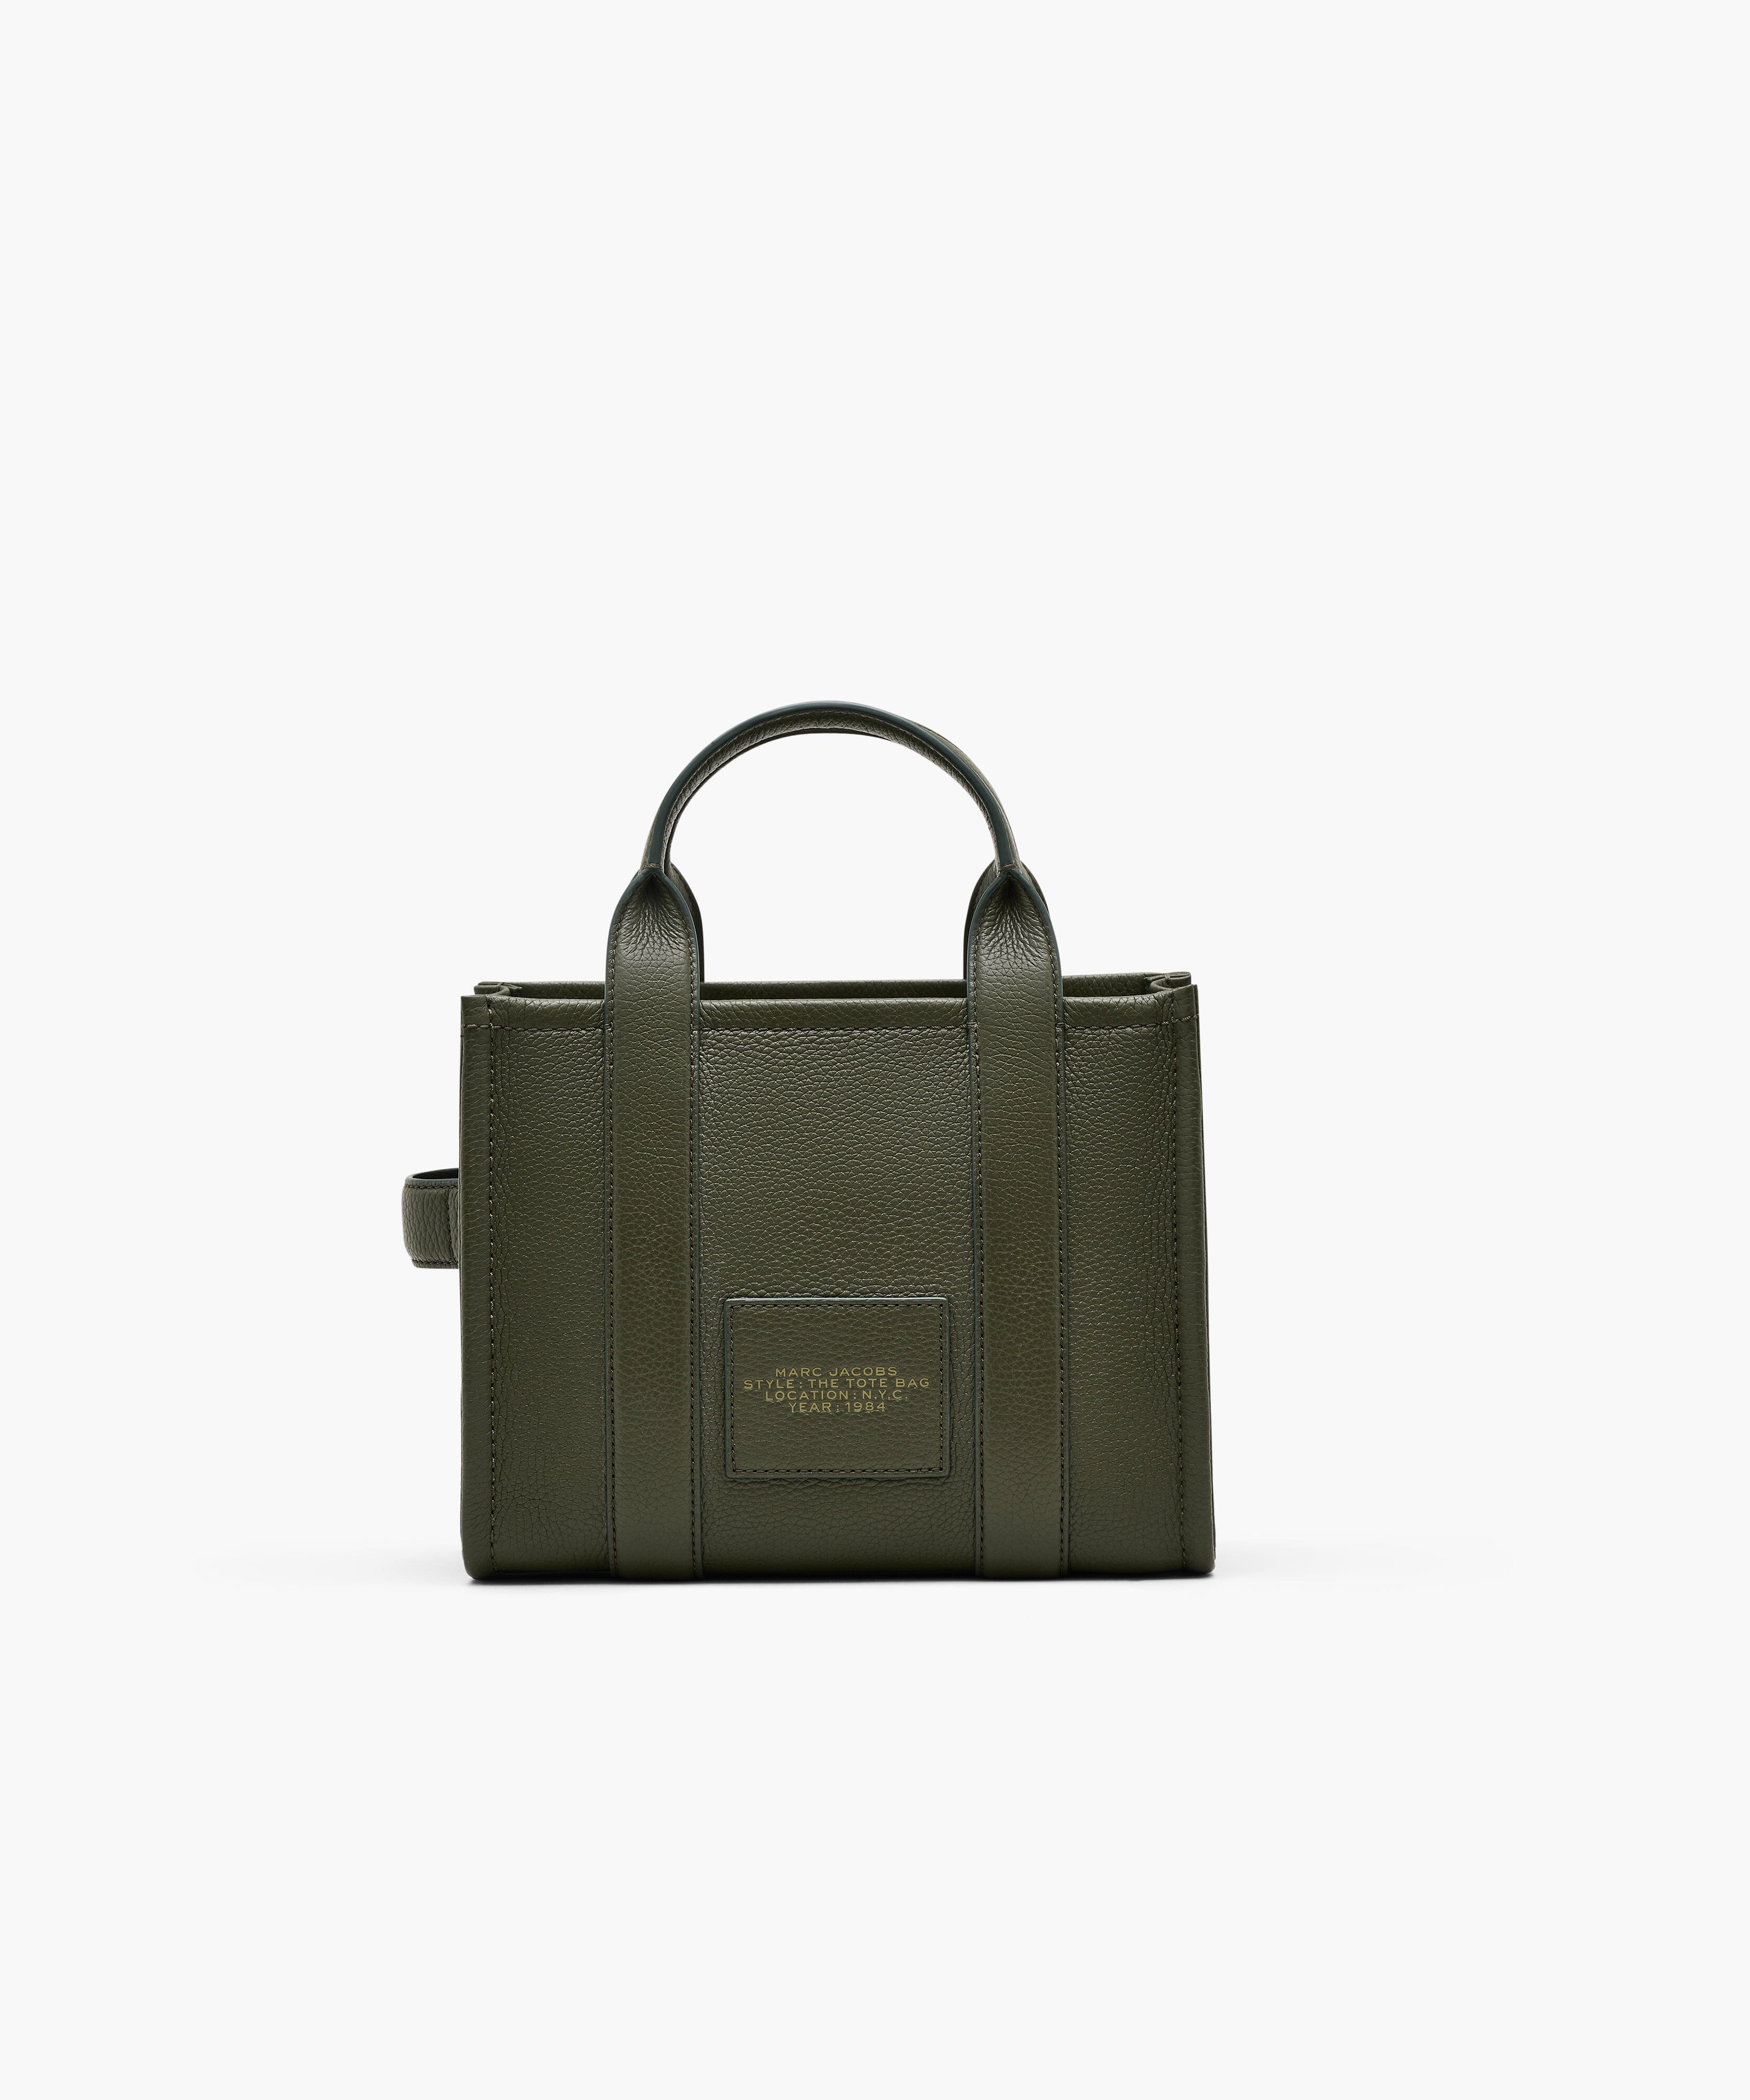 MARC JACOBS - H009L01SP21-305 - The Leather Small Tote Bag - Forest Borse Marc Jacobs 